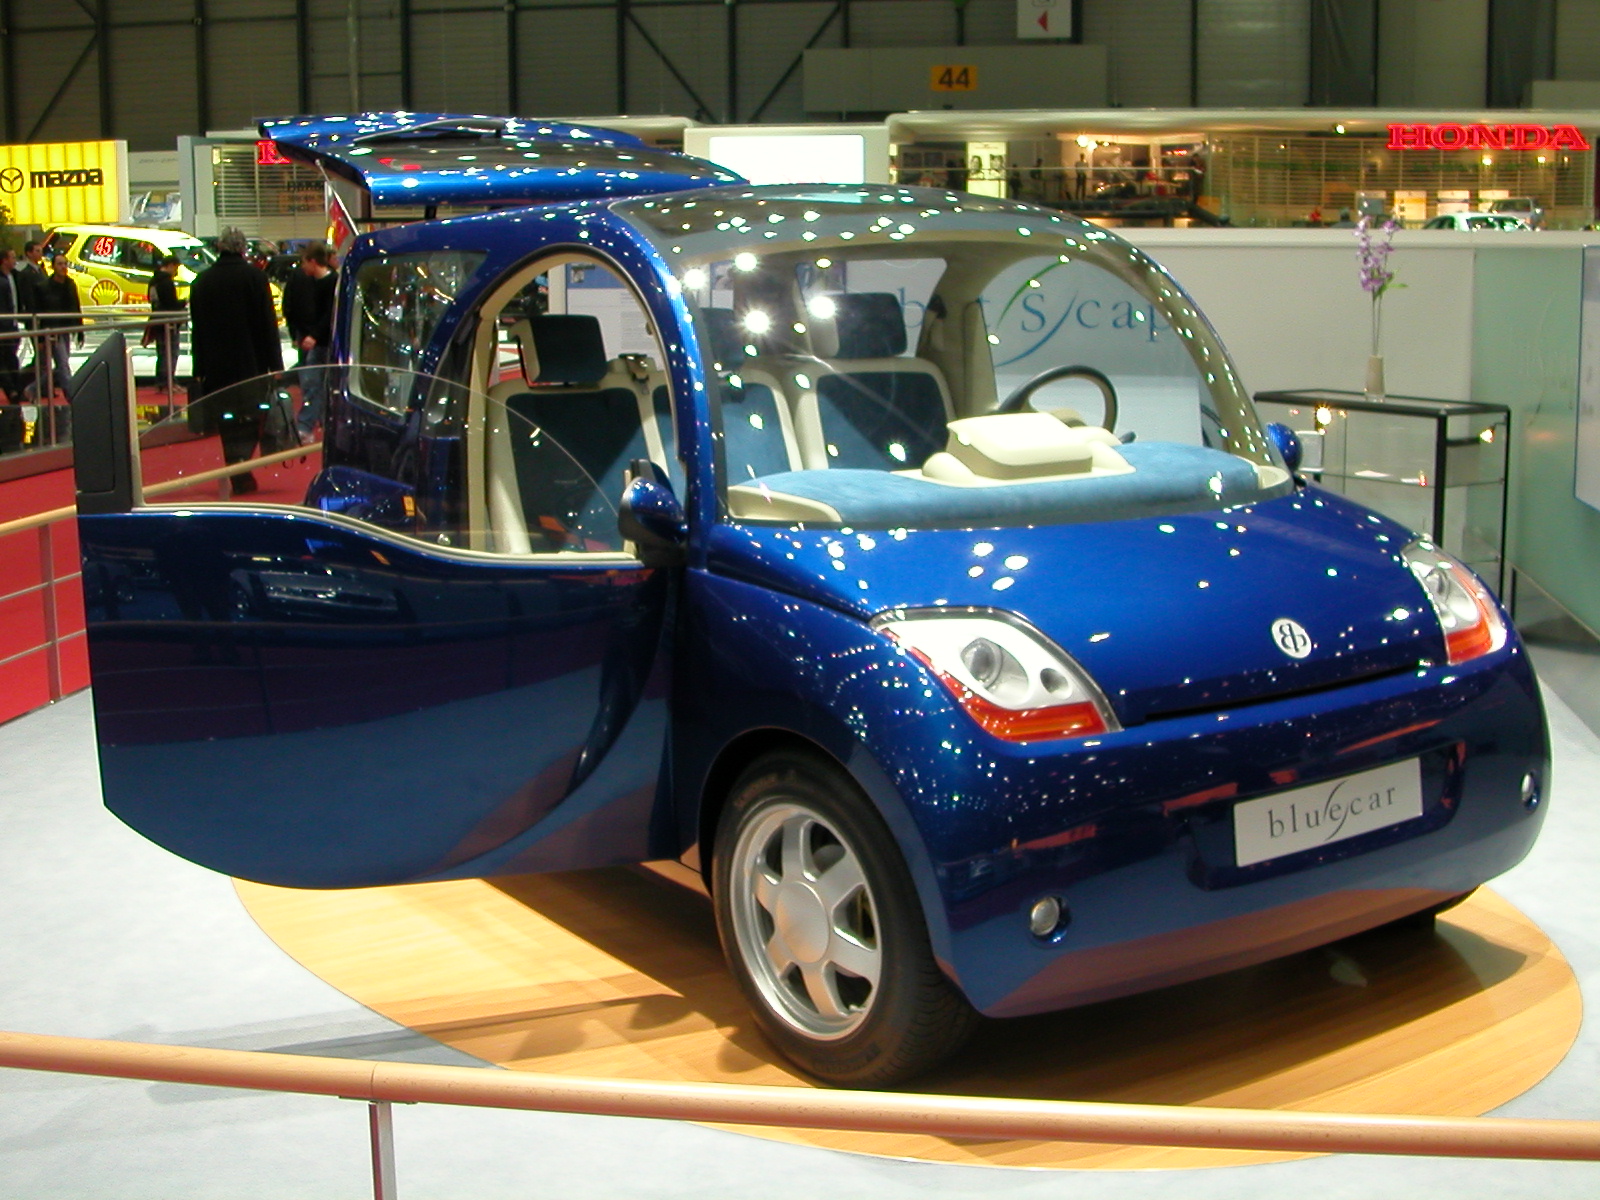 the new blue concept car is displayed in an exhibit